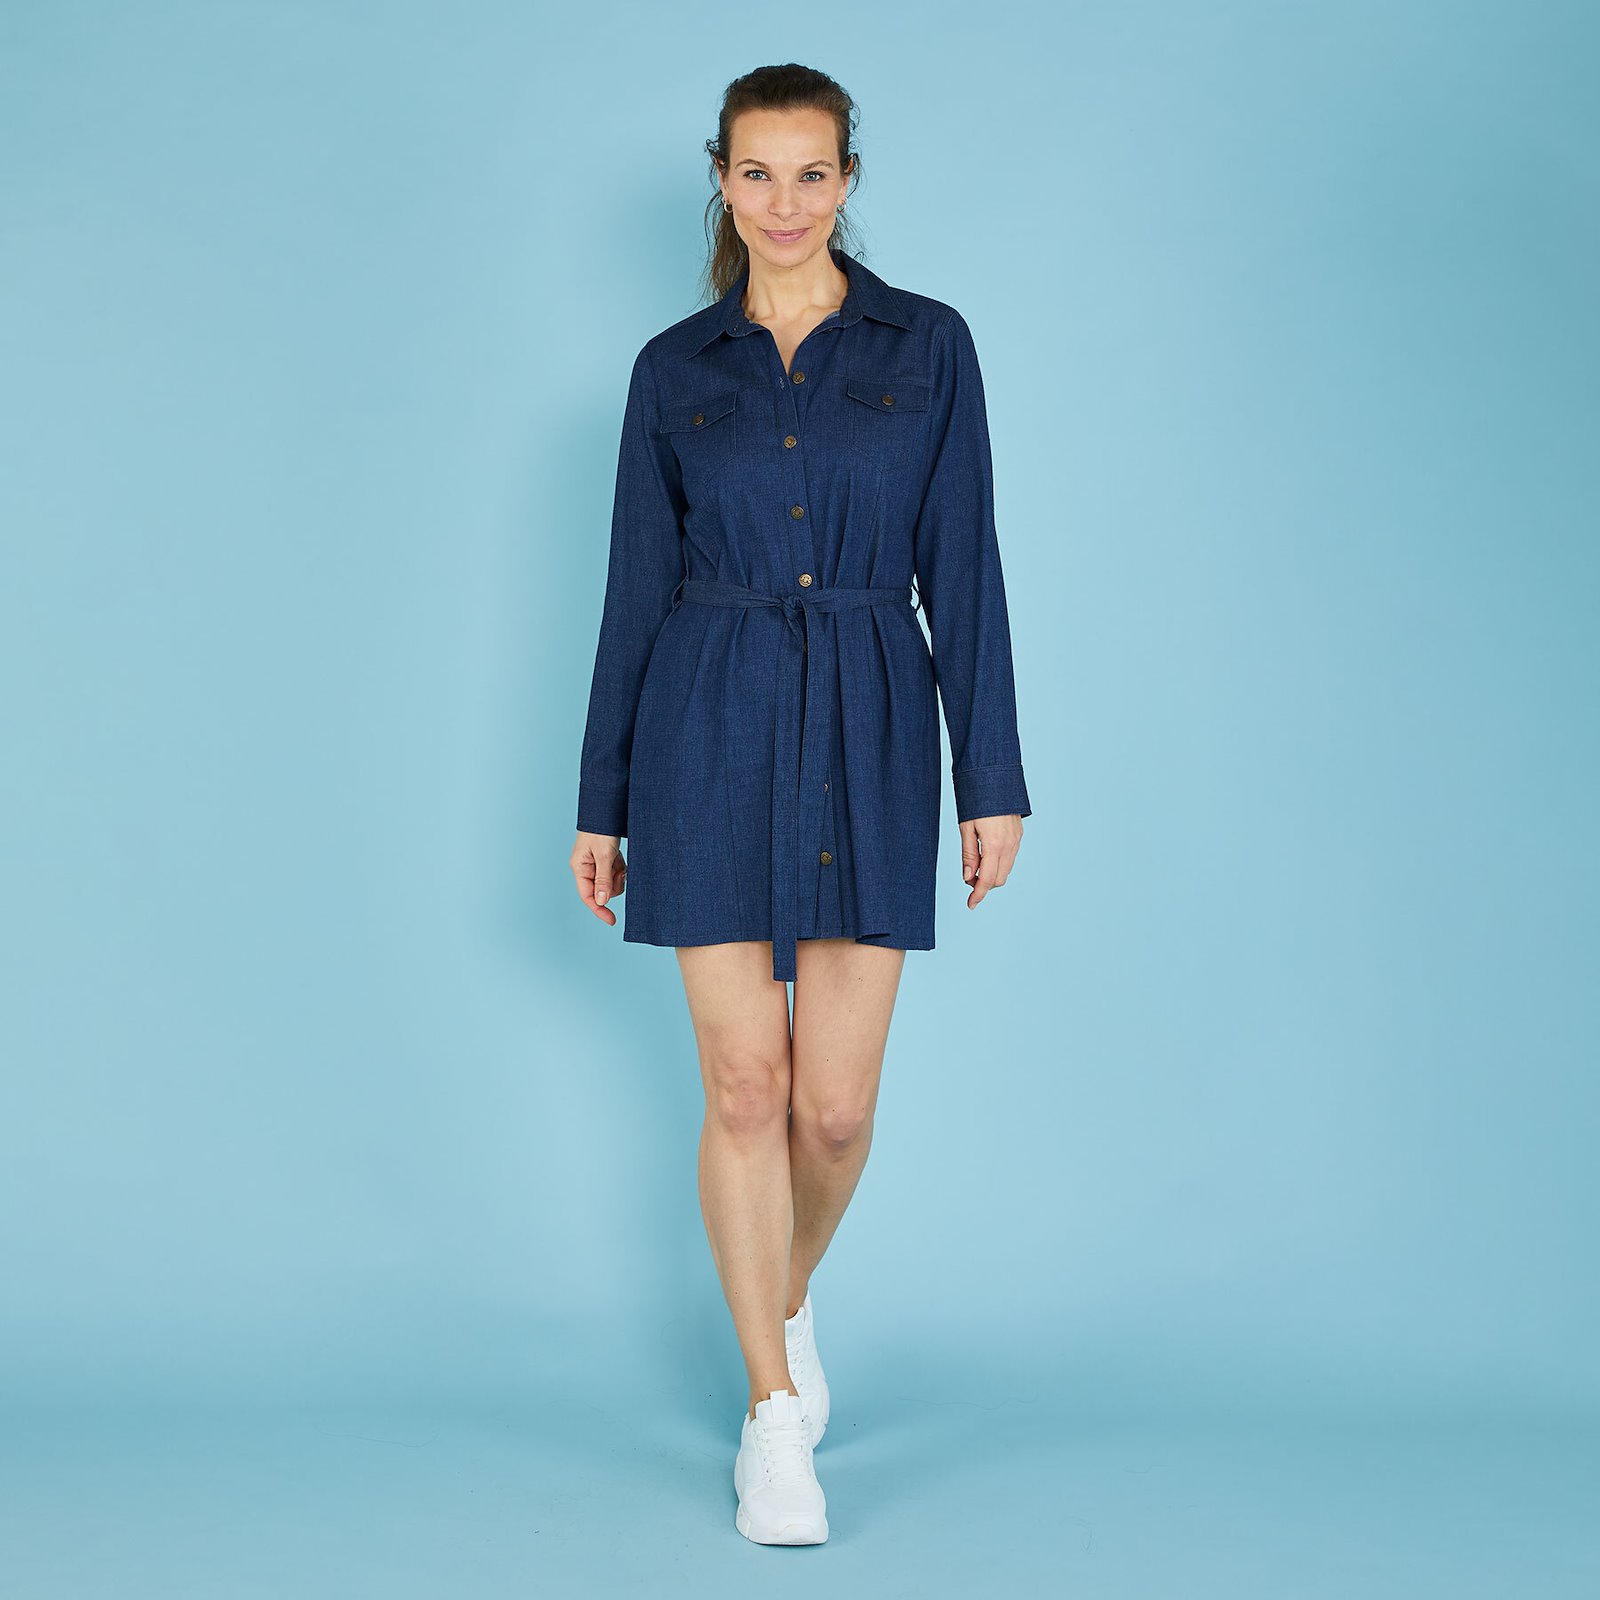 Fitted shirt dress with tie belt, 40/12 p23176000_p23176001_p23176002_p23176003_p23176004_pack_d